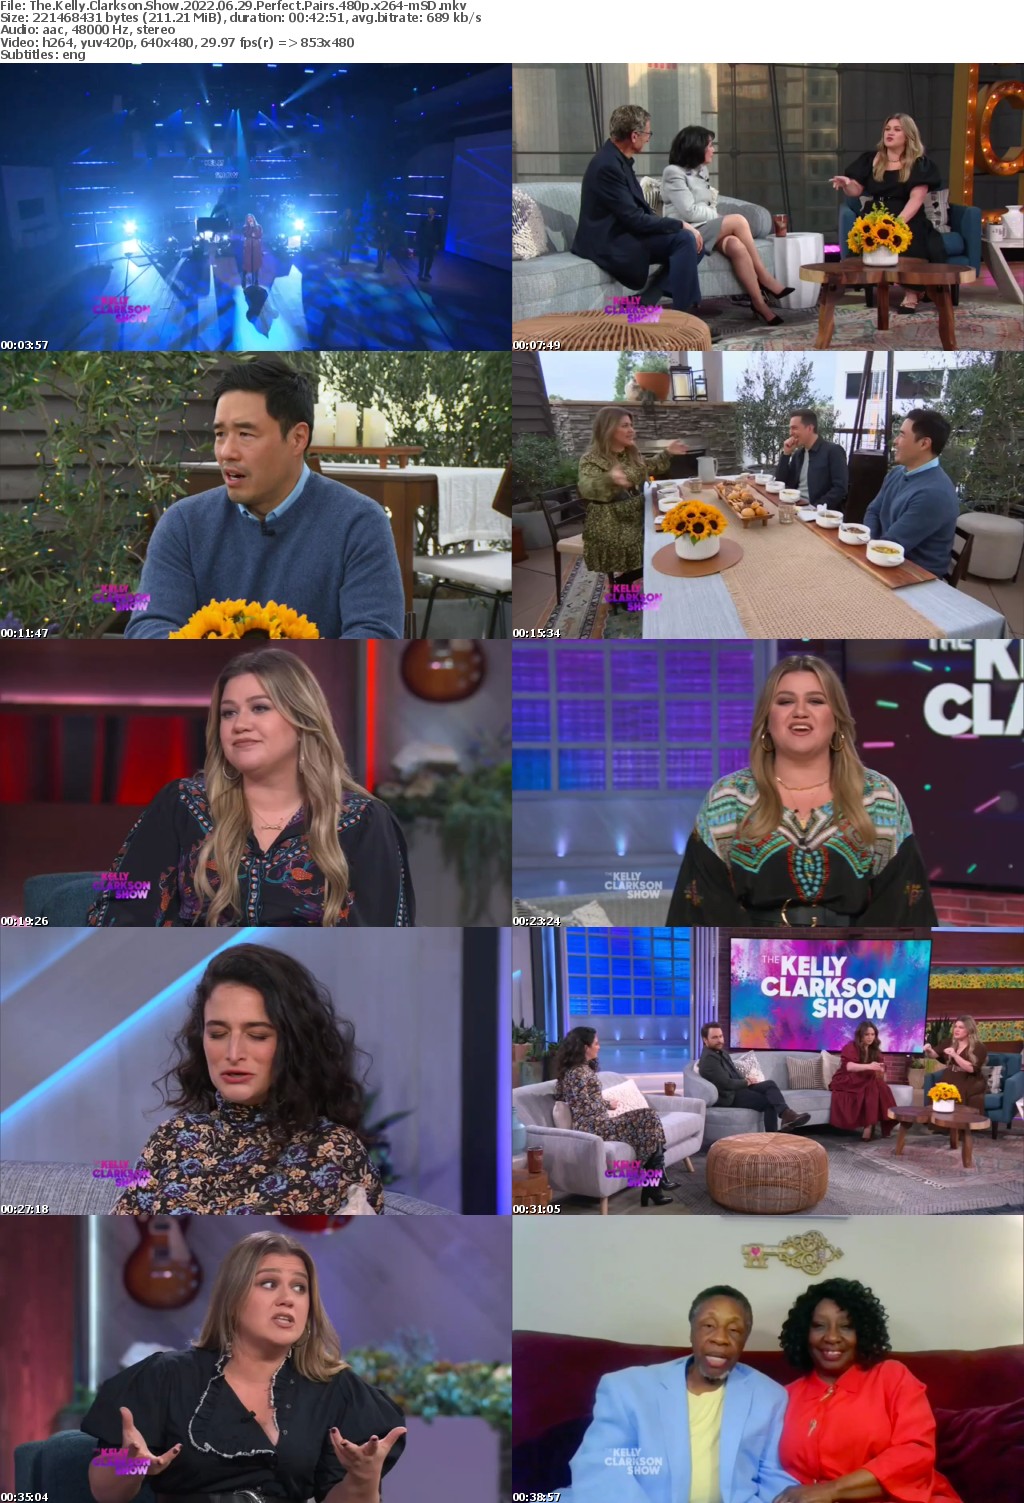 The Kelly Clarkson Show 2022 06 29 Perfect Pairs 480p x264-mSD